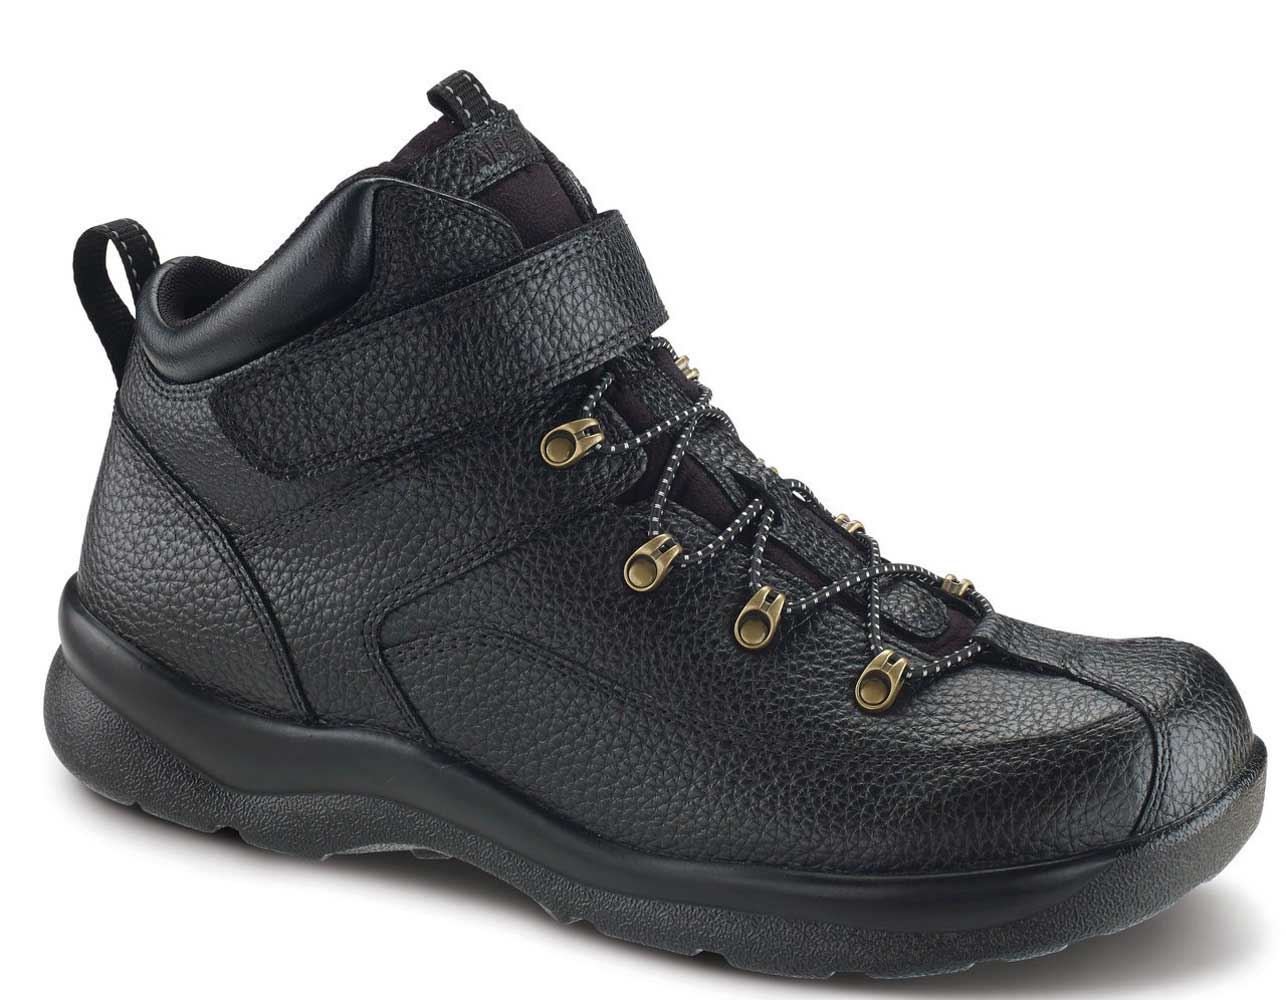 diabetic hiking boots